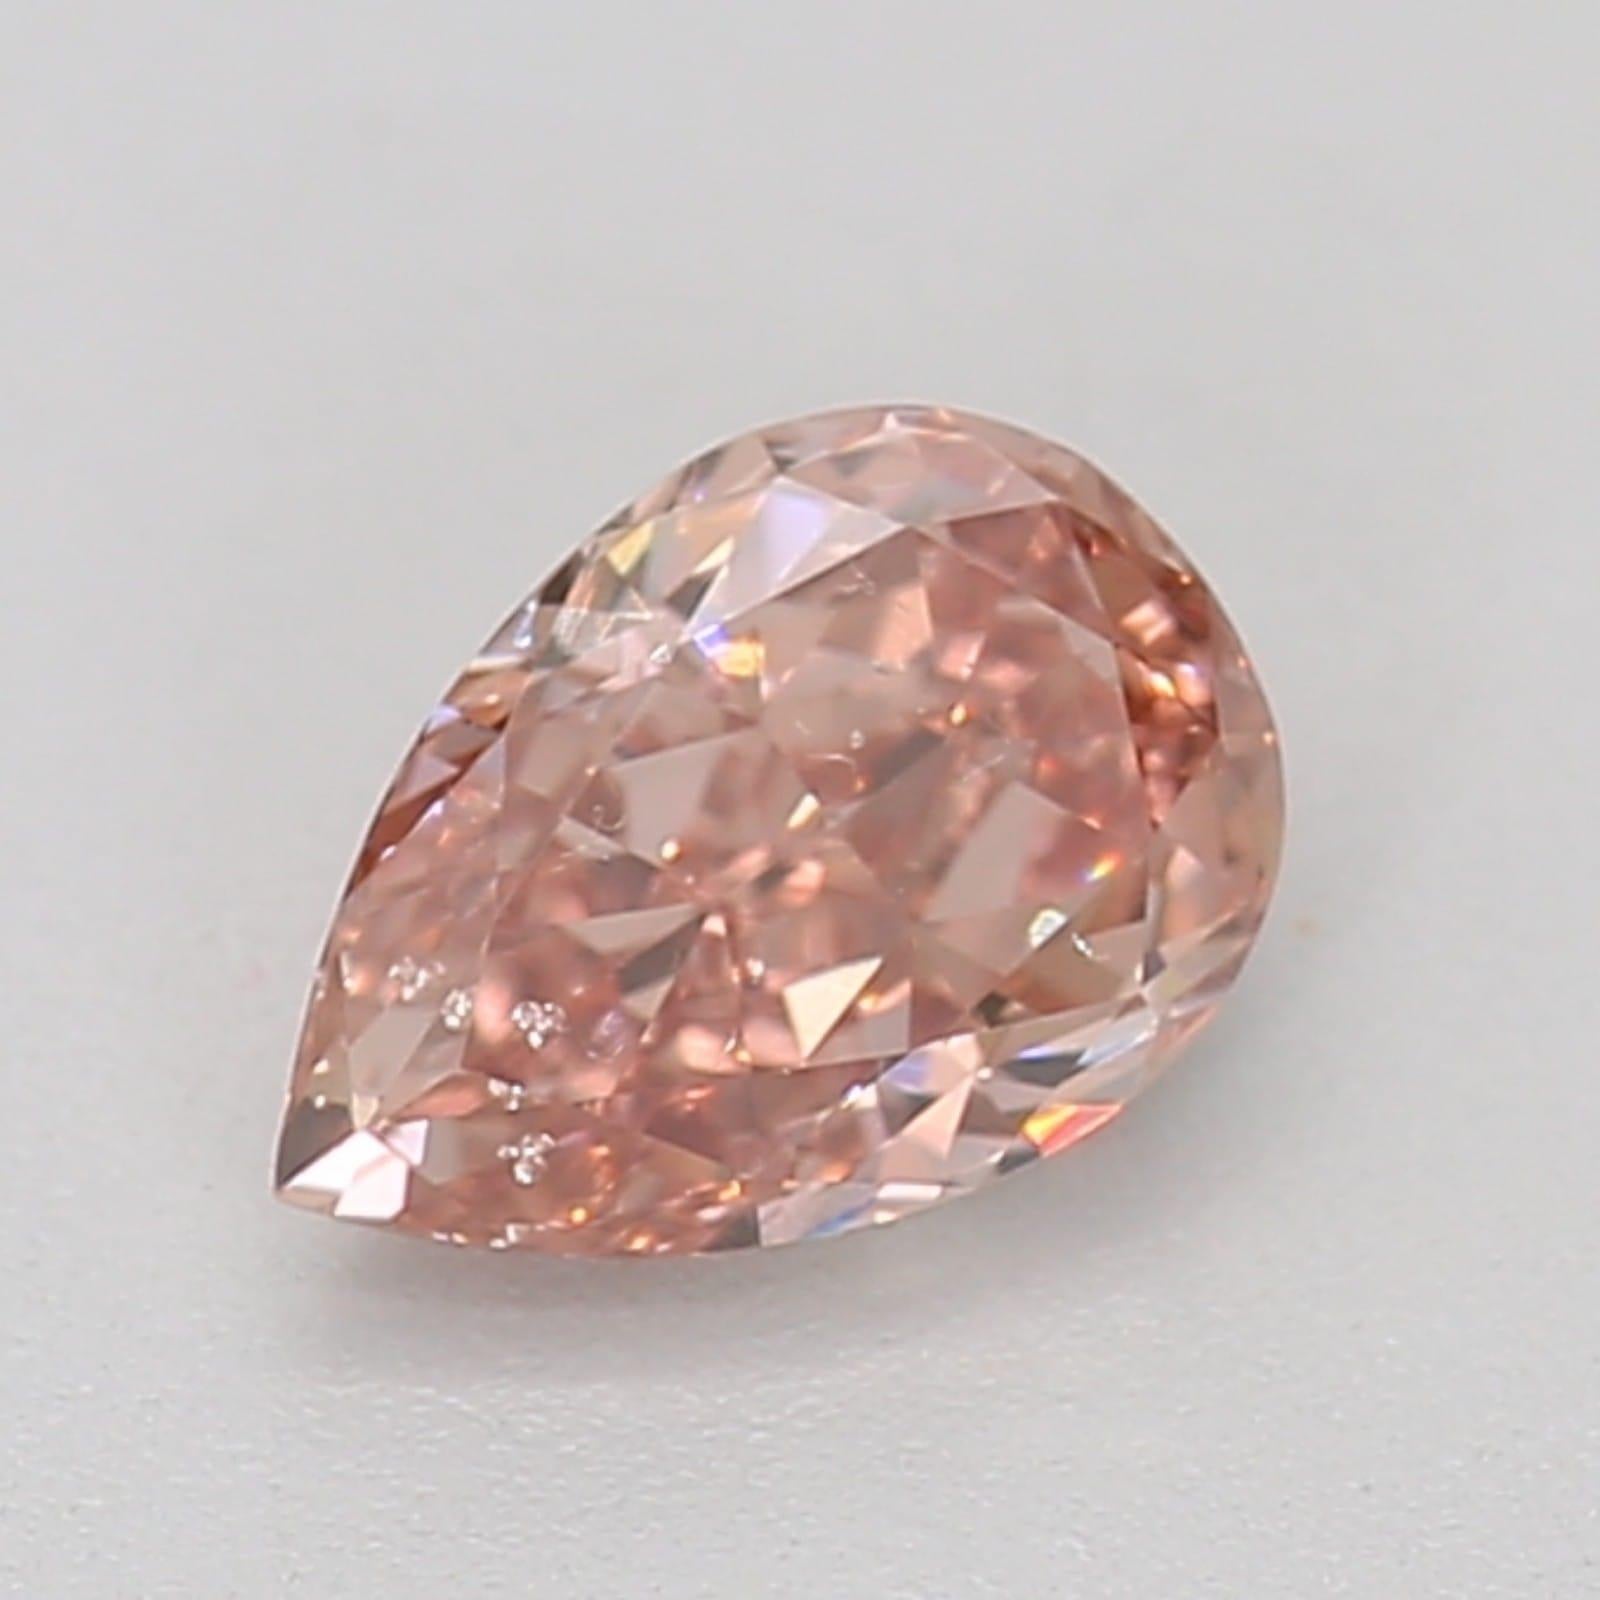 ***100% NATURAL FANCY COLOUR DIAMOND***

✪ Diamond Details ✪

➛ Shape: Pear
➛ Colour Grade: Fancy Brownish Orangy Pink 
➛ Carat: 0.33
➛ GIA Certified 

^FEATURES OF THE DIAMOND^

This 0.33 carat diamond has a diameter around 4.4mm. Our Fancy